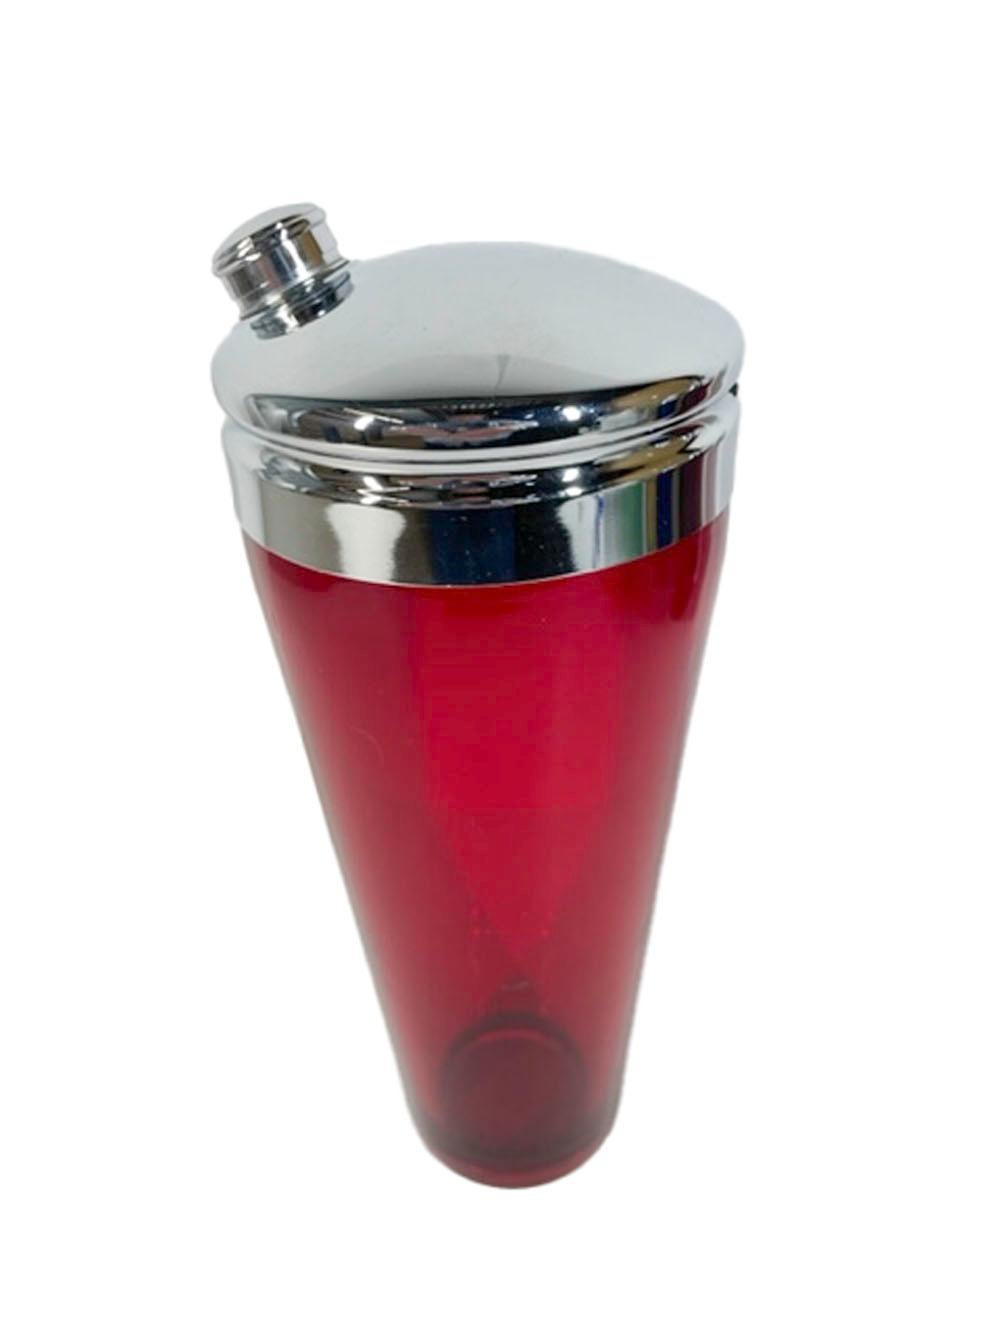 Ruby red Art Deco cocktail shaker with chrome lid.